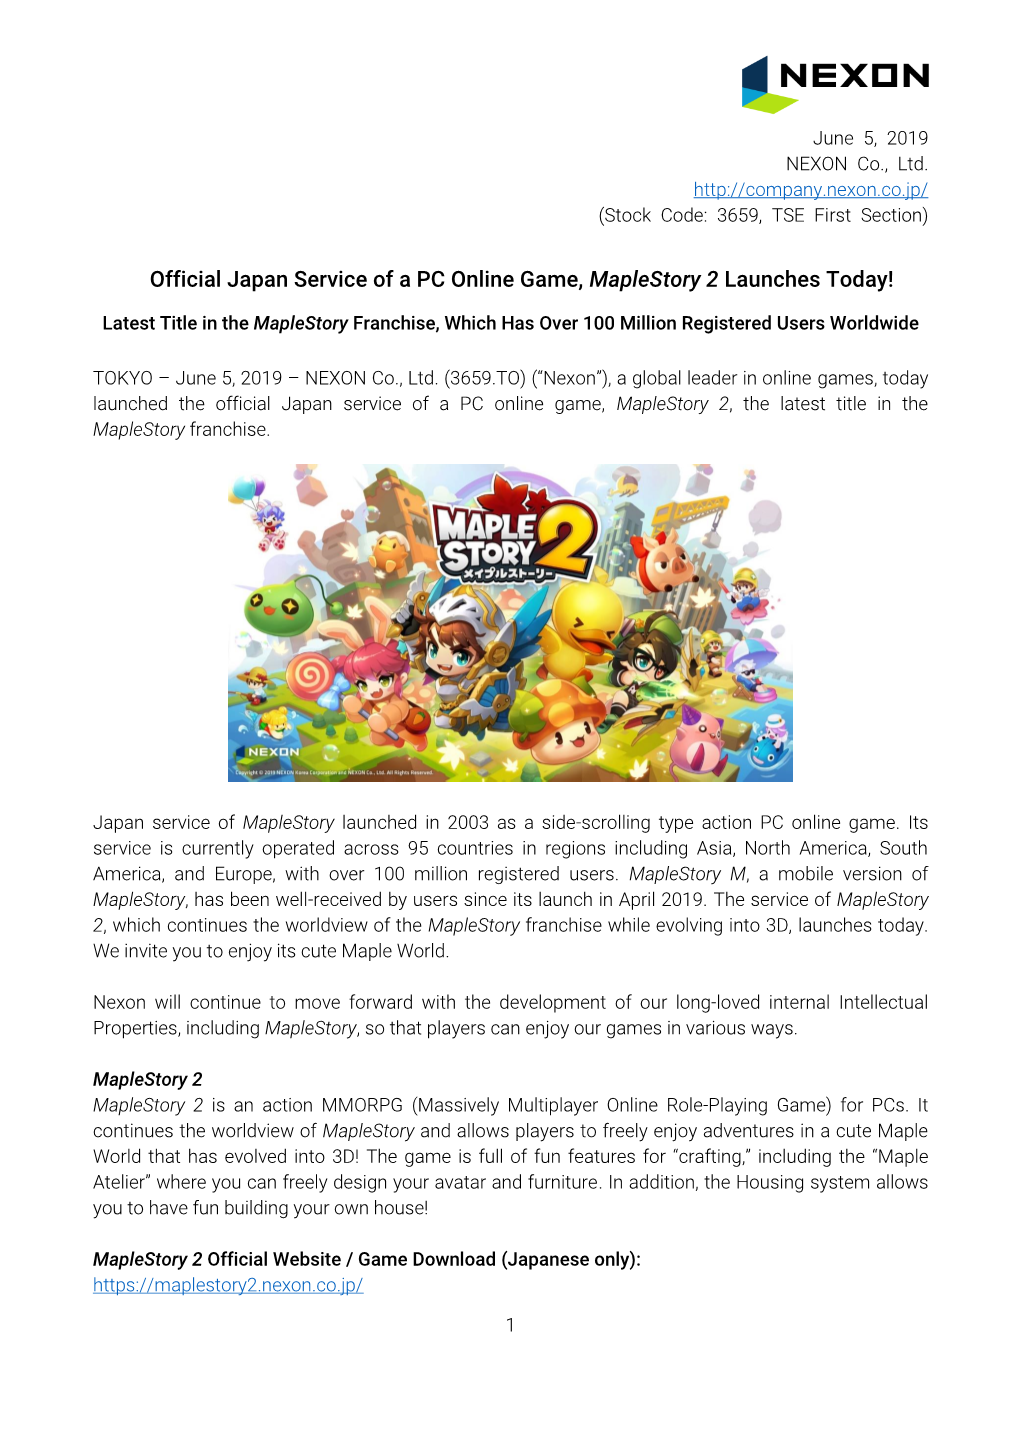 Official Japan Service of a PC Online Game, Maplestory 2 Launches Today!